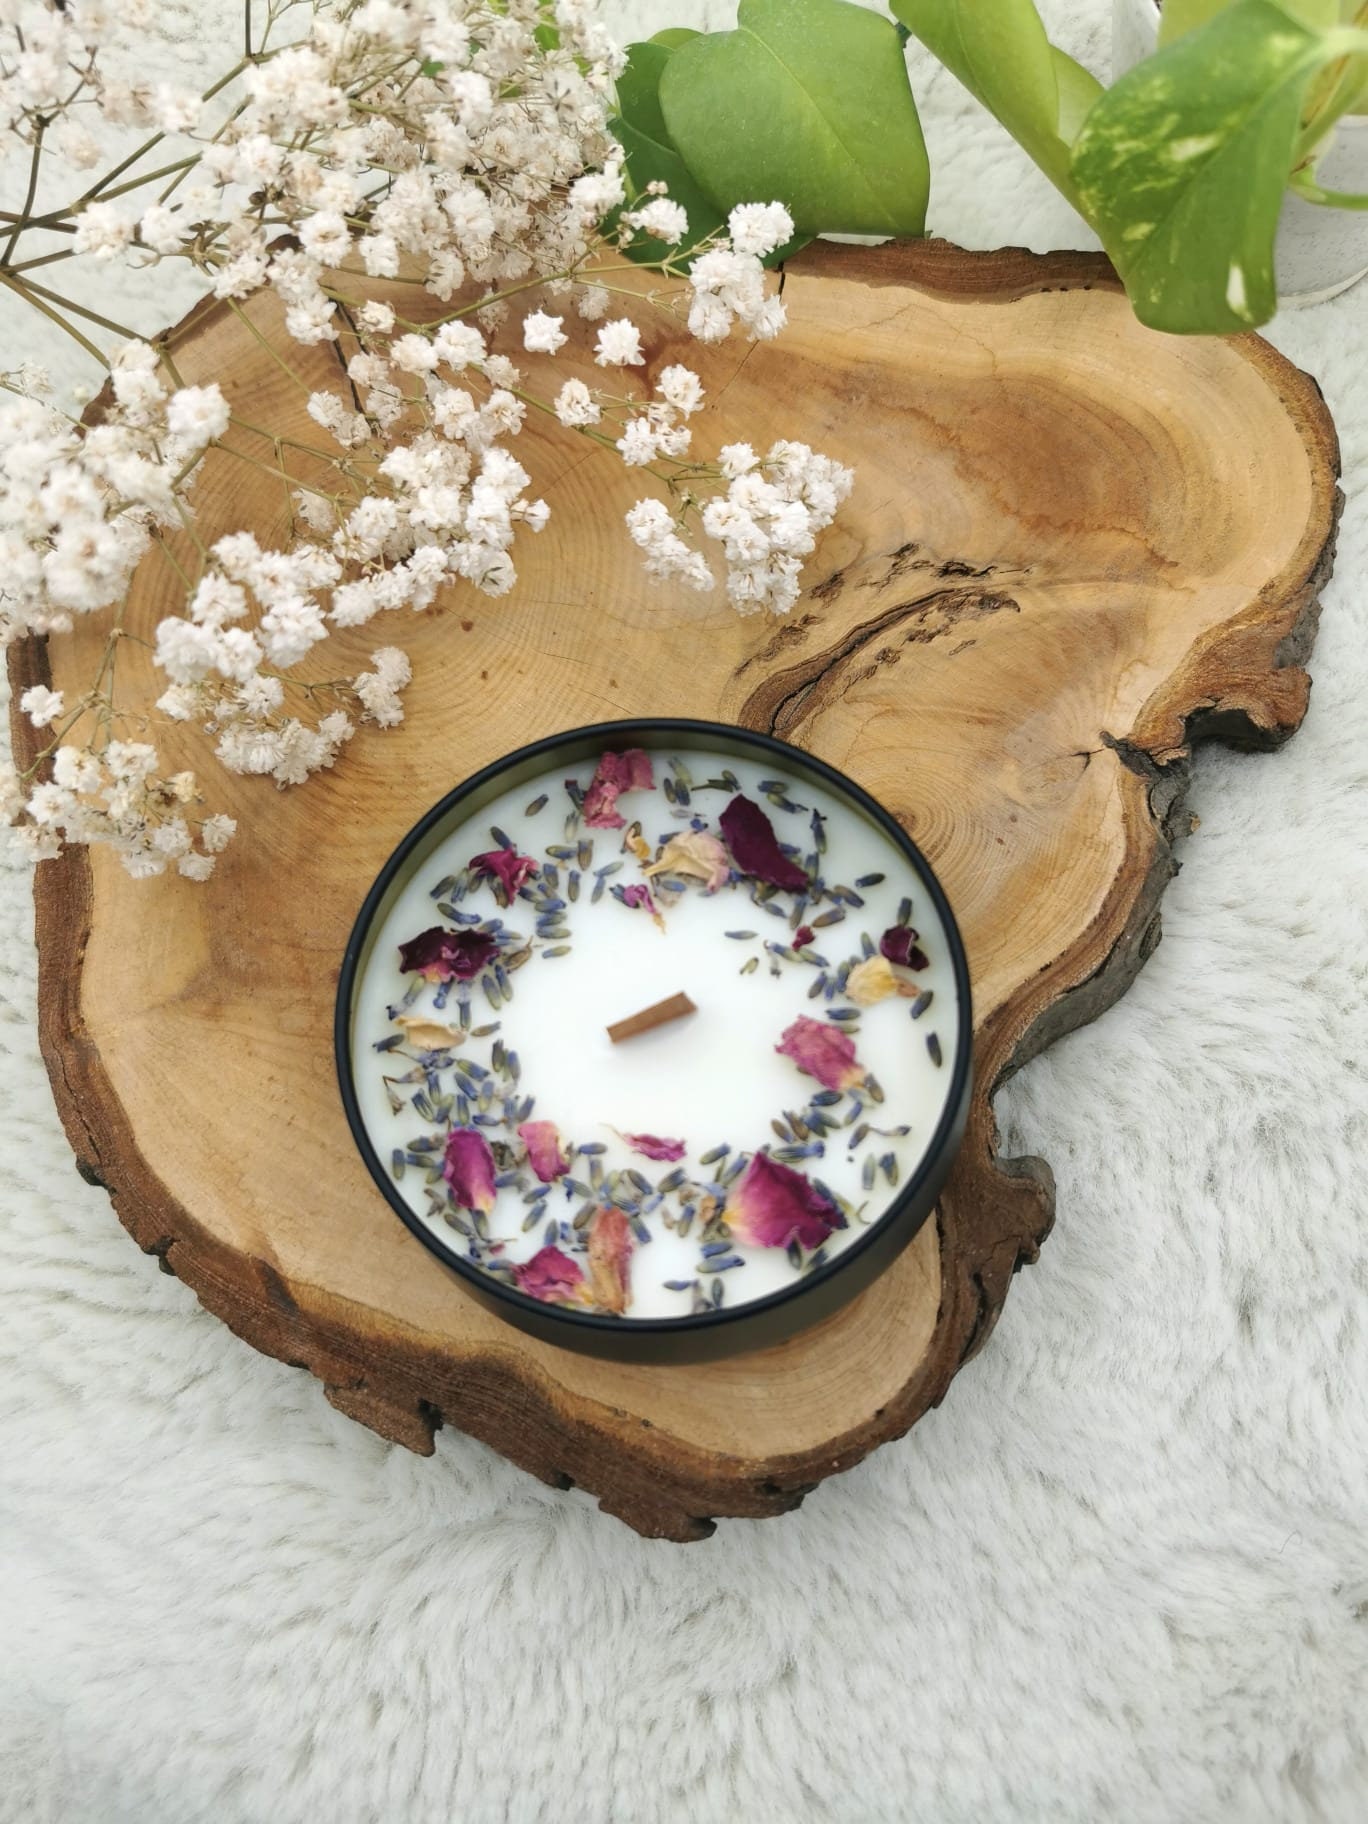 COYMOS Dried Flowers and Herbs 100% Natural Dry Flowers for Candle